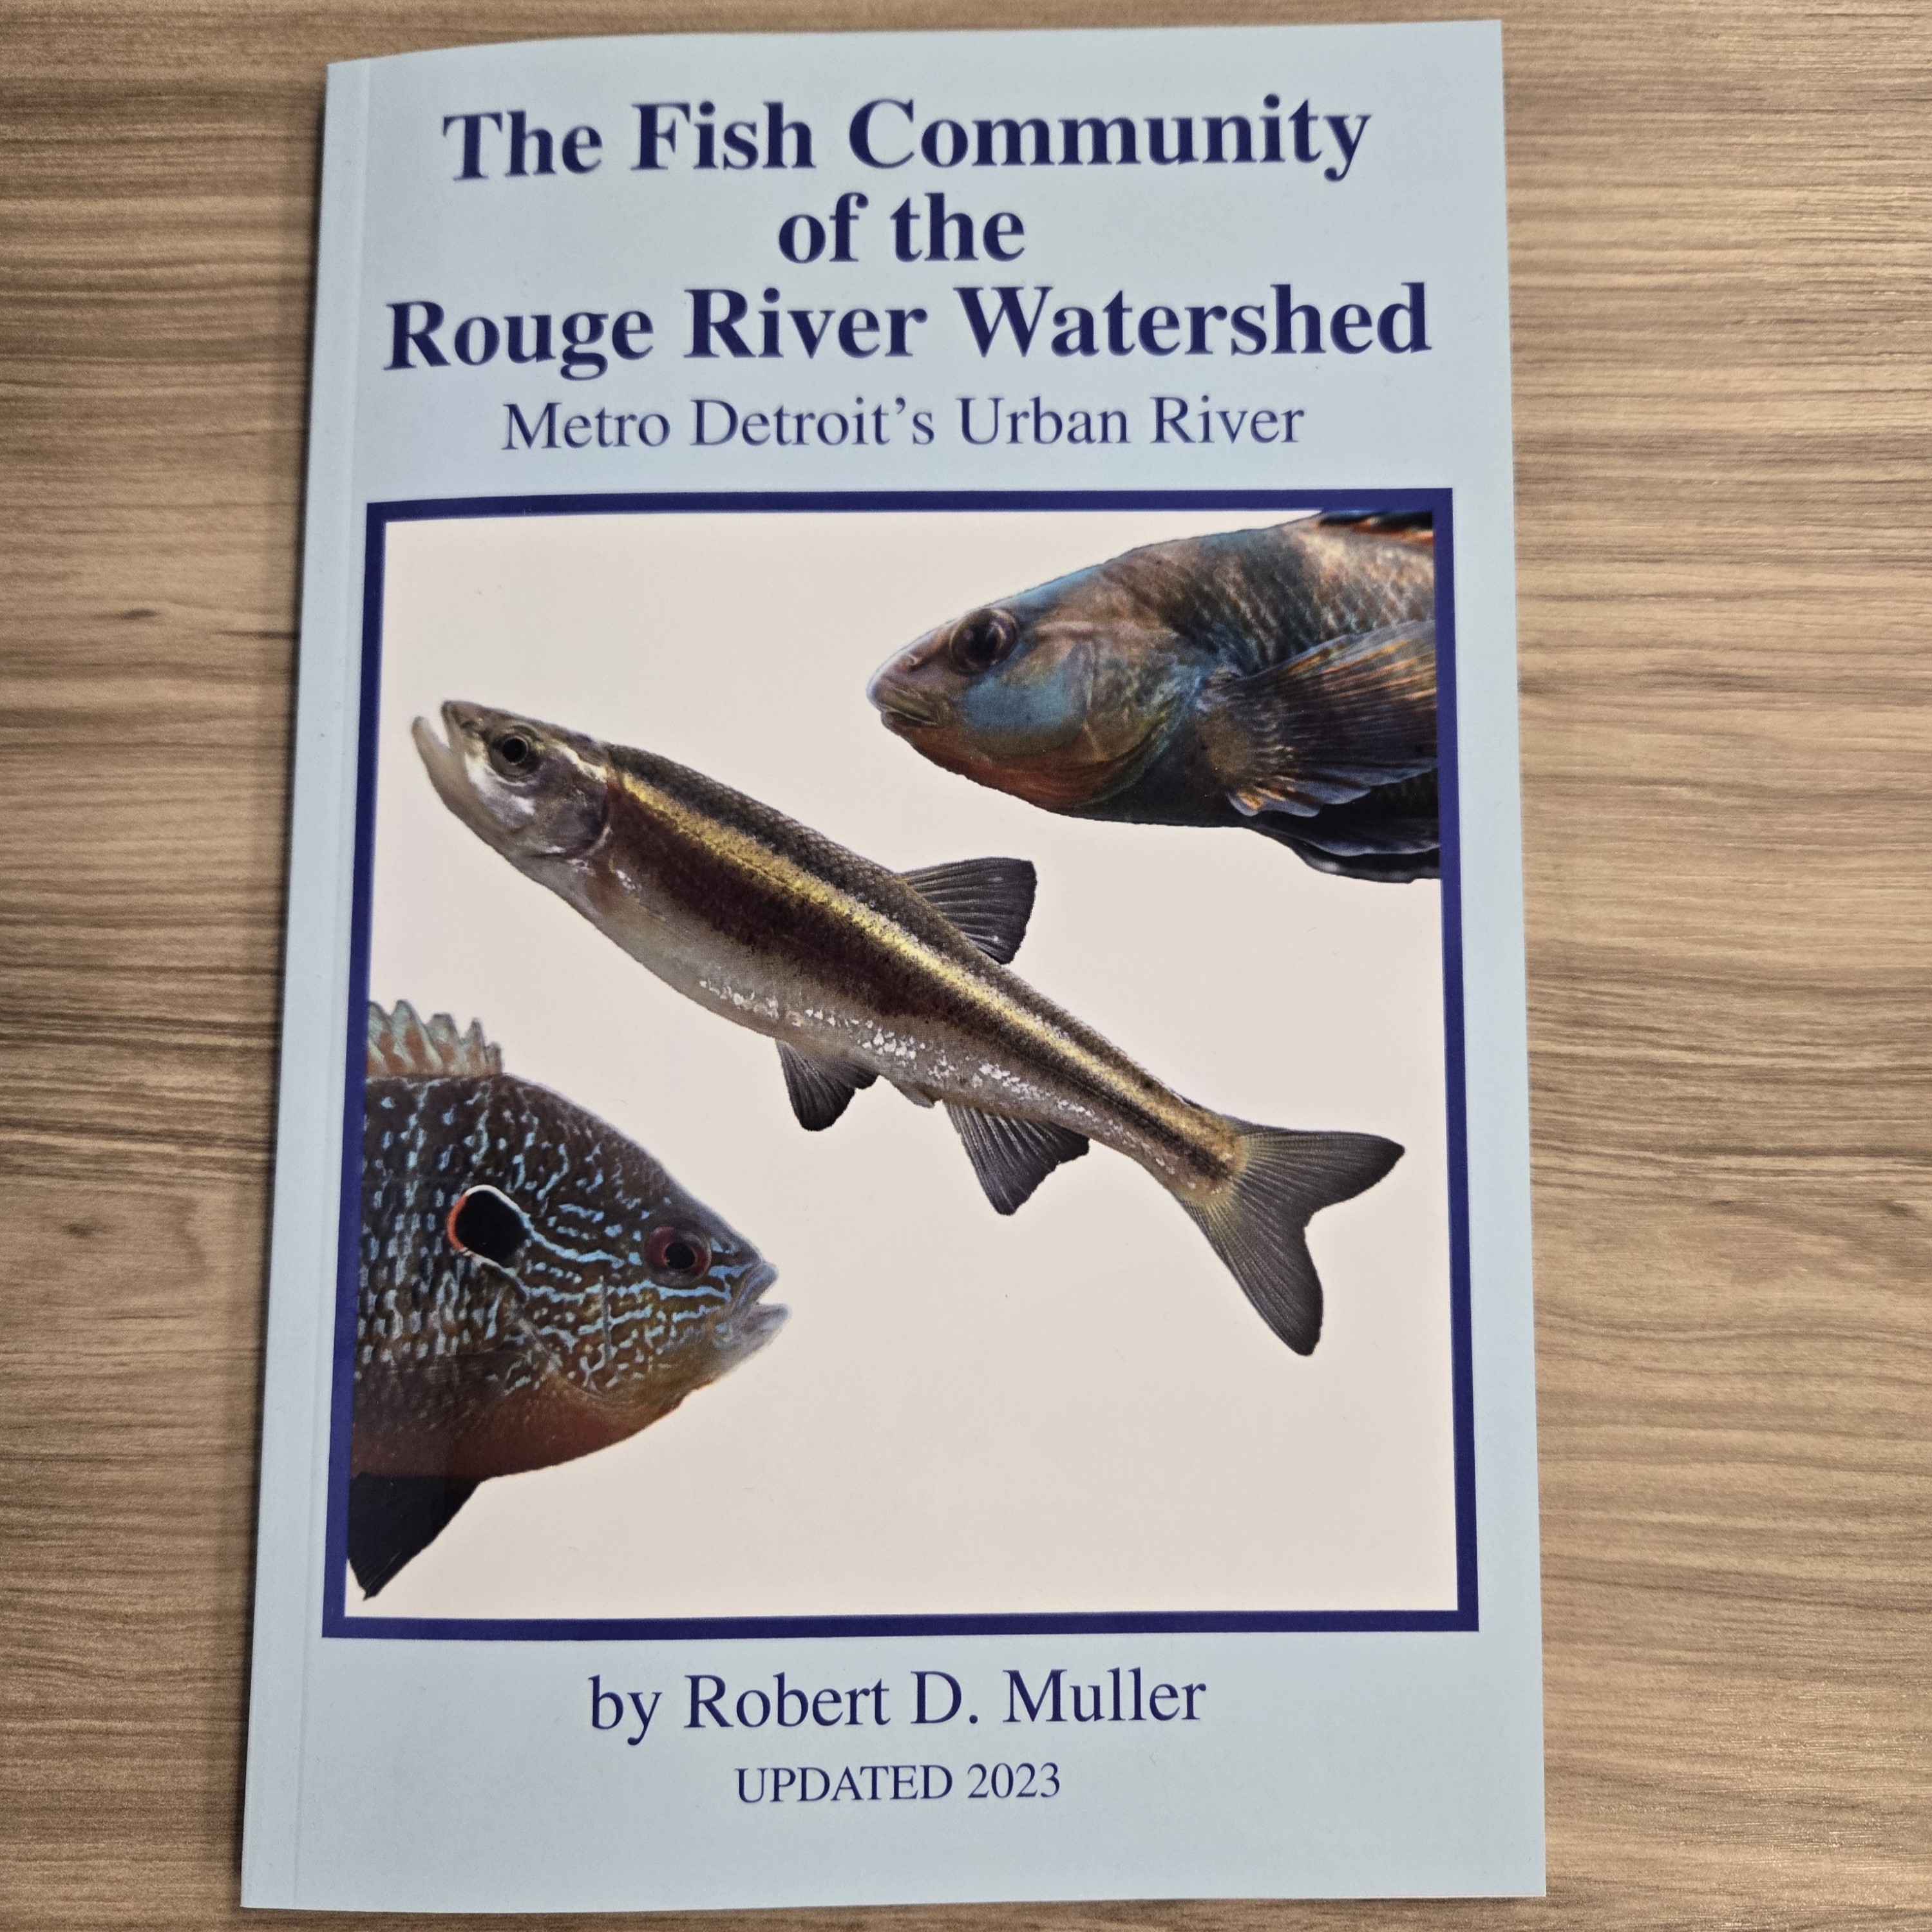 The Fish Community of the Rouge River Watershed (2023 Updated)